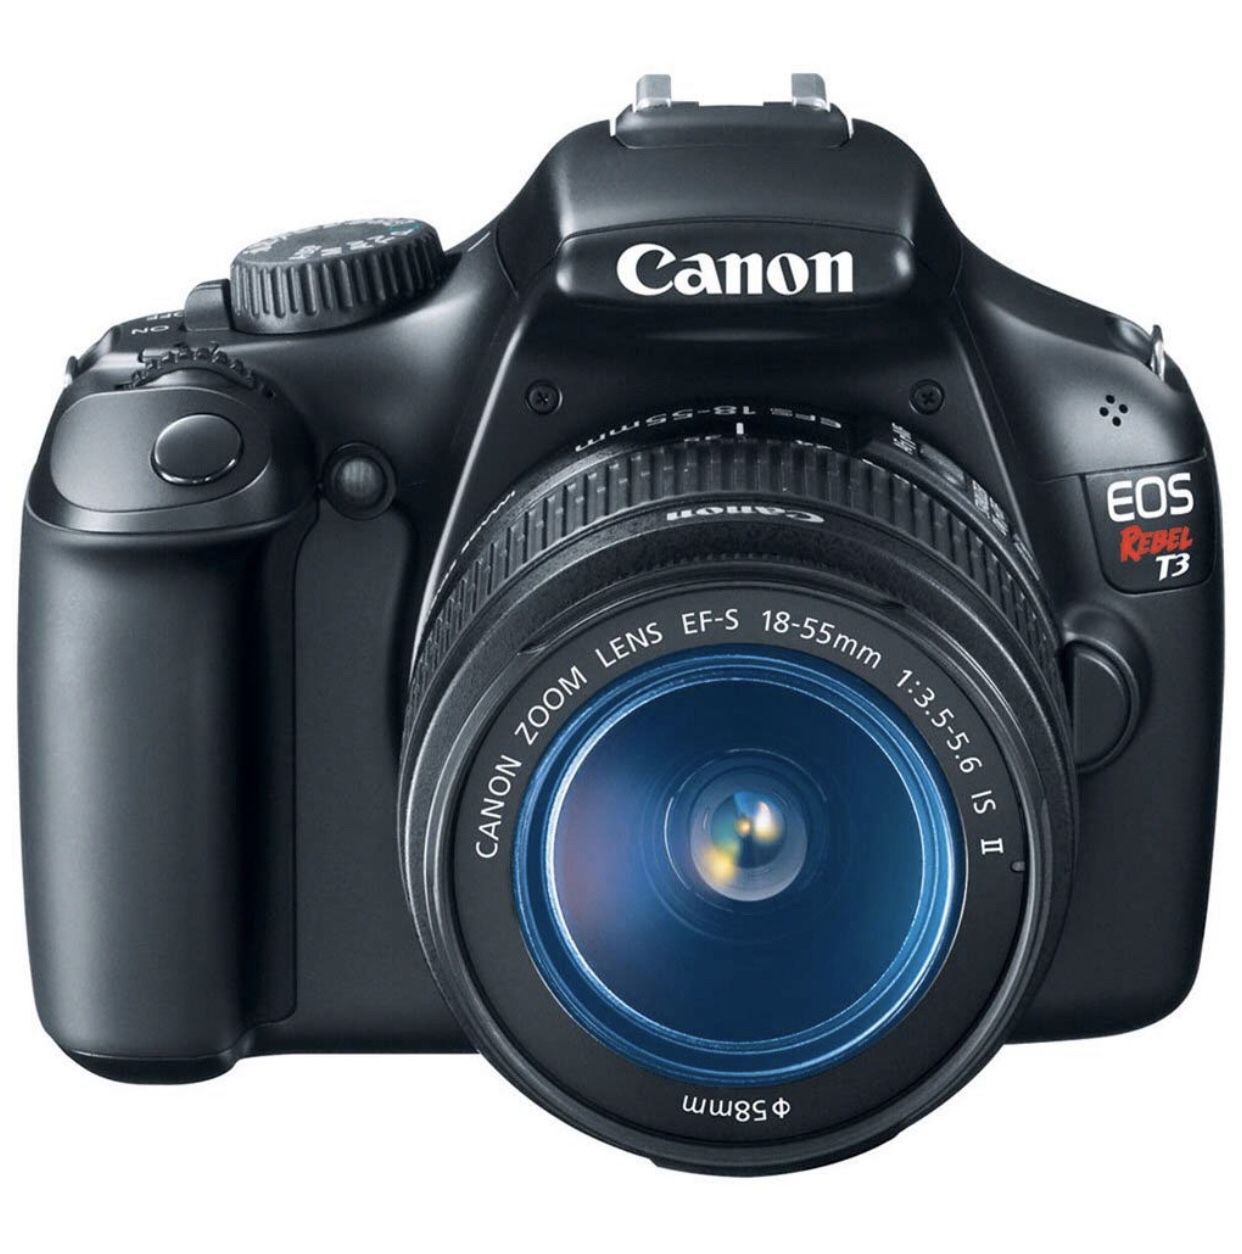 Canon EOS Rebel T3 Digital SLR Camera with EF-S 18-55mm f/3.5-5.6 IS Lens and Camera Bag